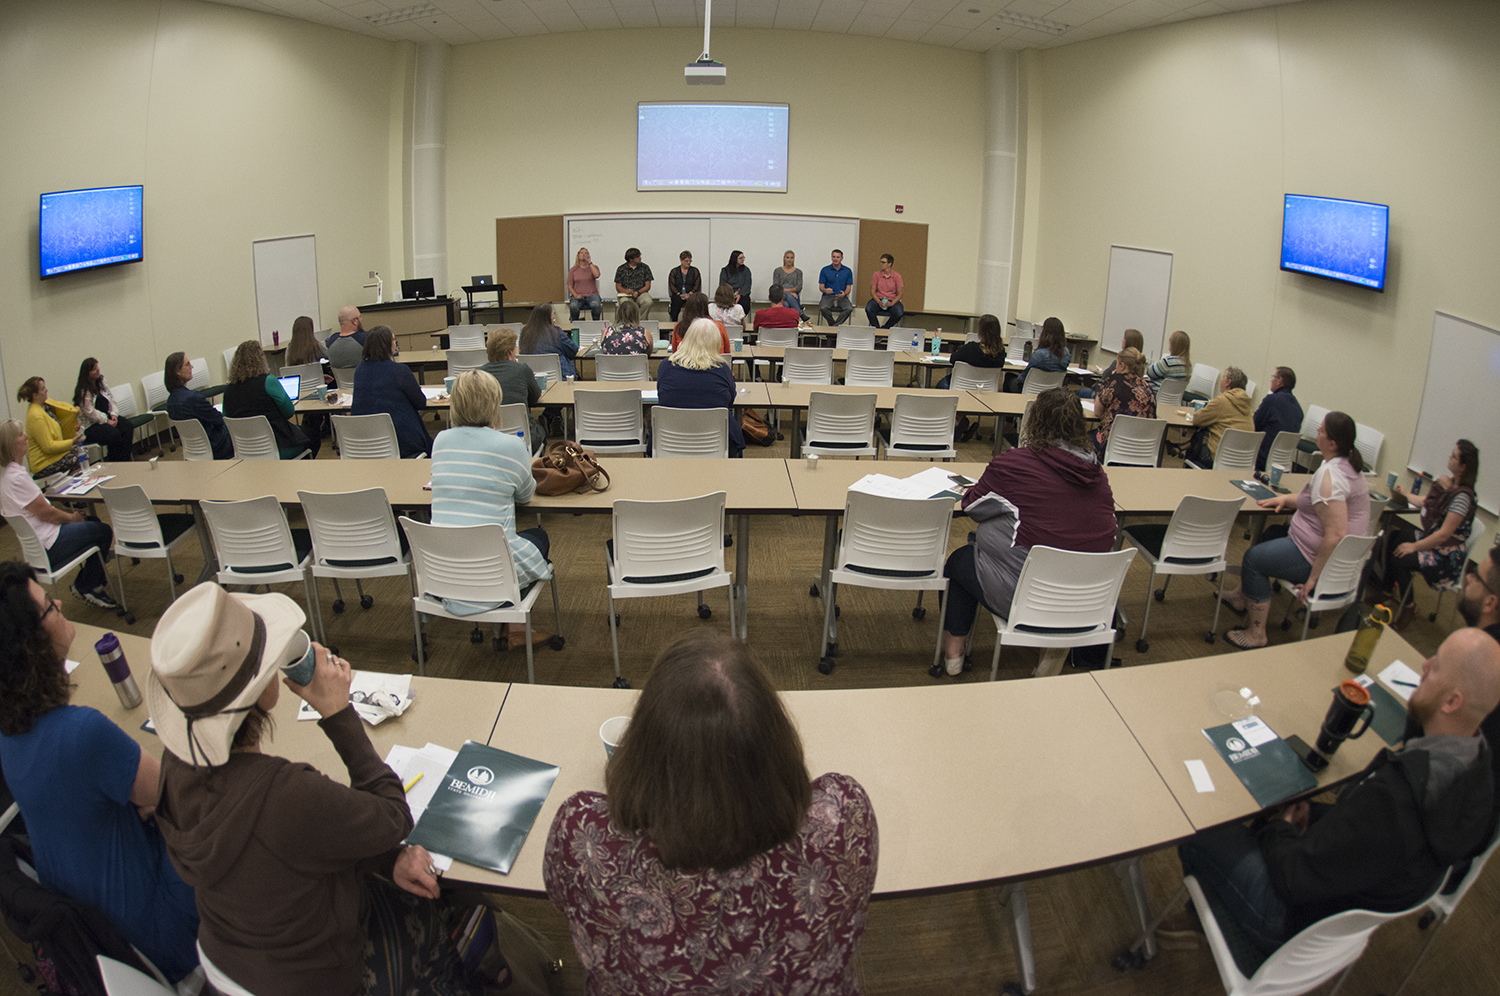 Gallery Special Education Conference at Bemidji State University BSU